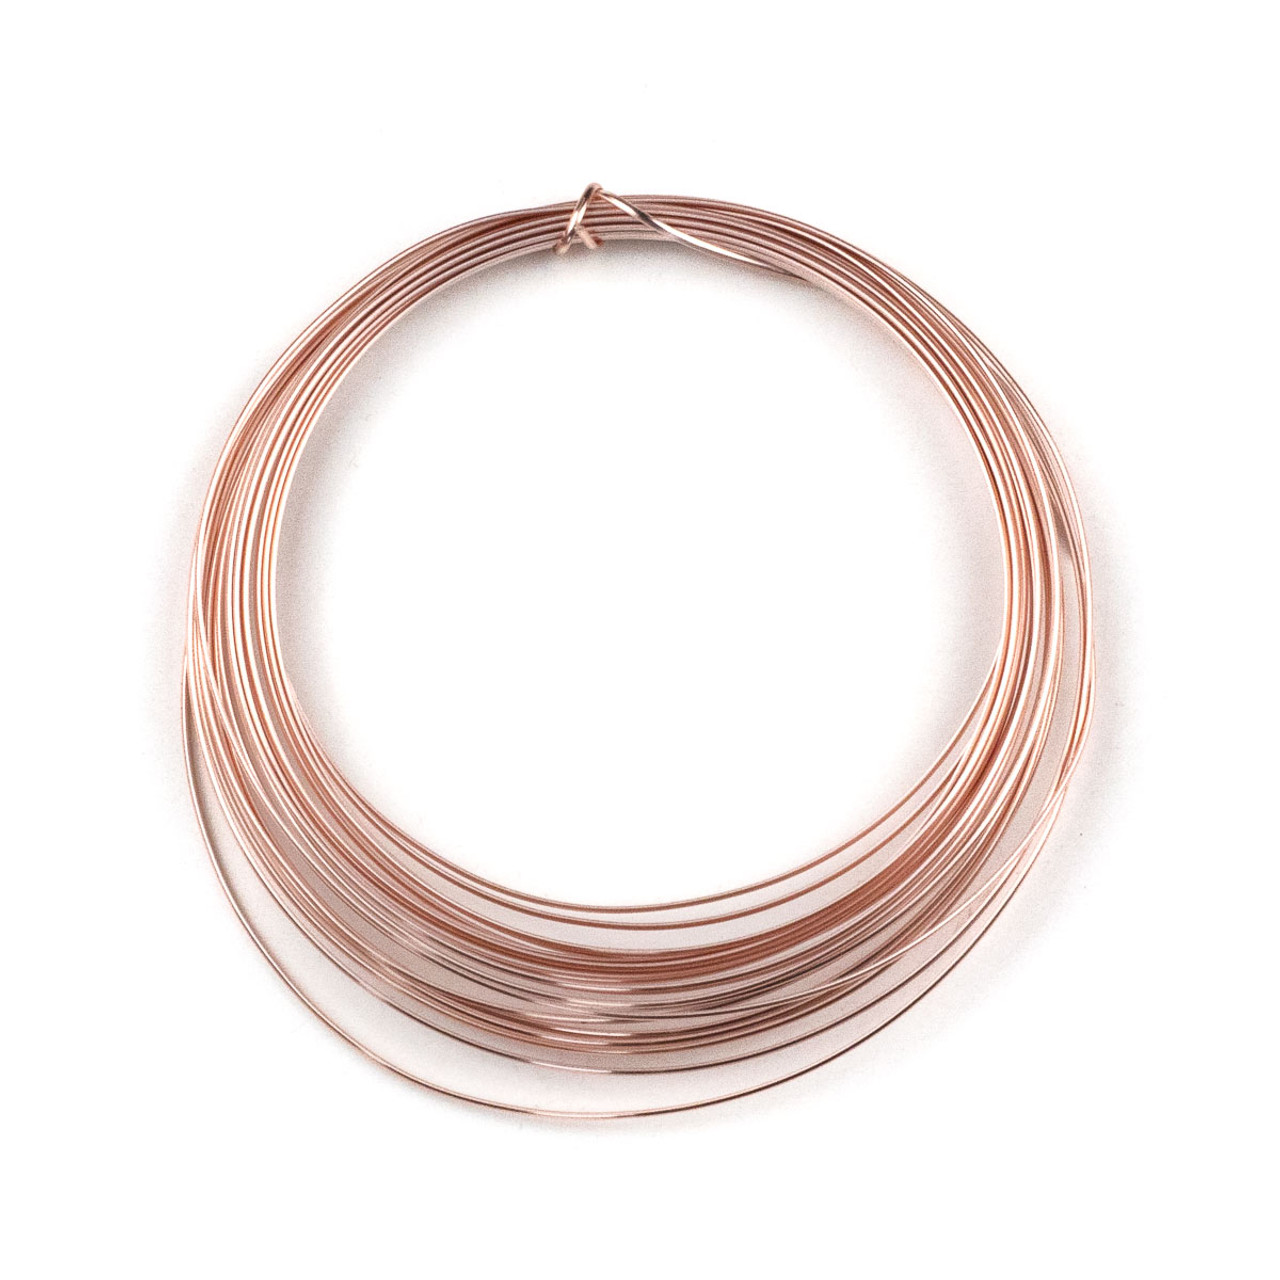 3 Pack - ARTISTIC WIRE Bare Copper Wire 18 Gauge / 4 YD Wire For